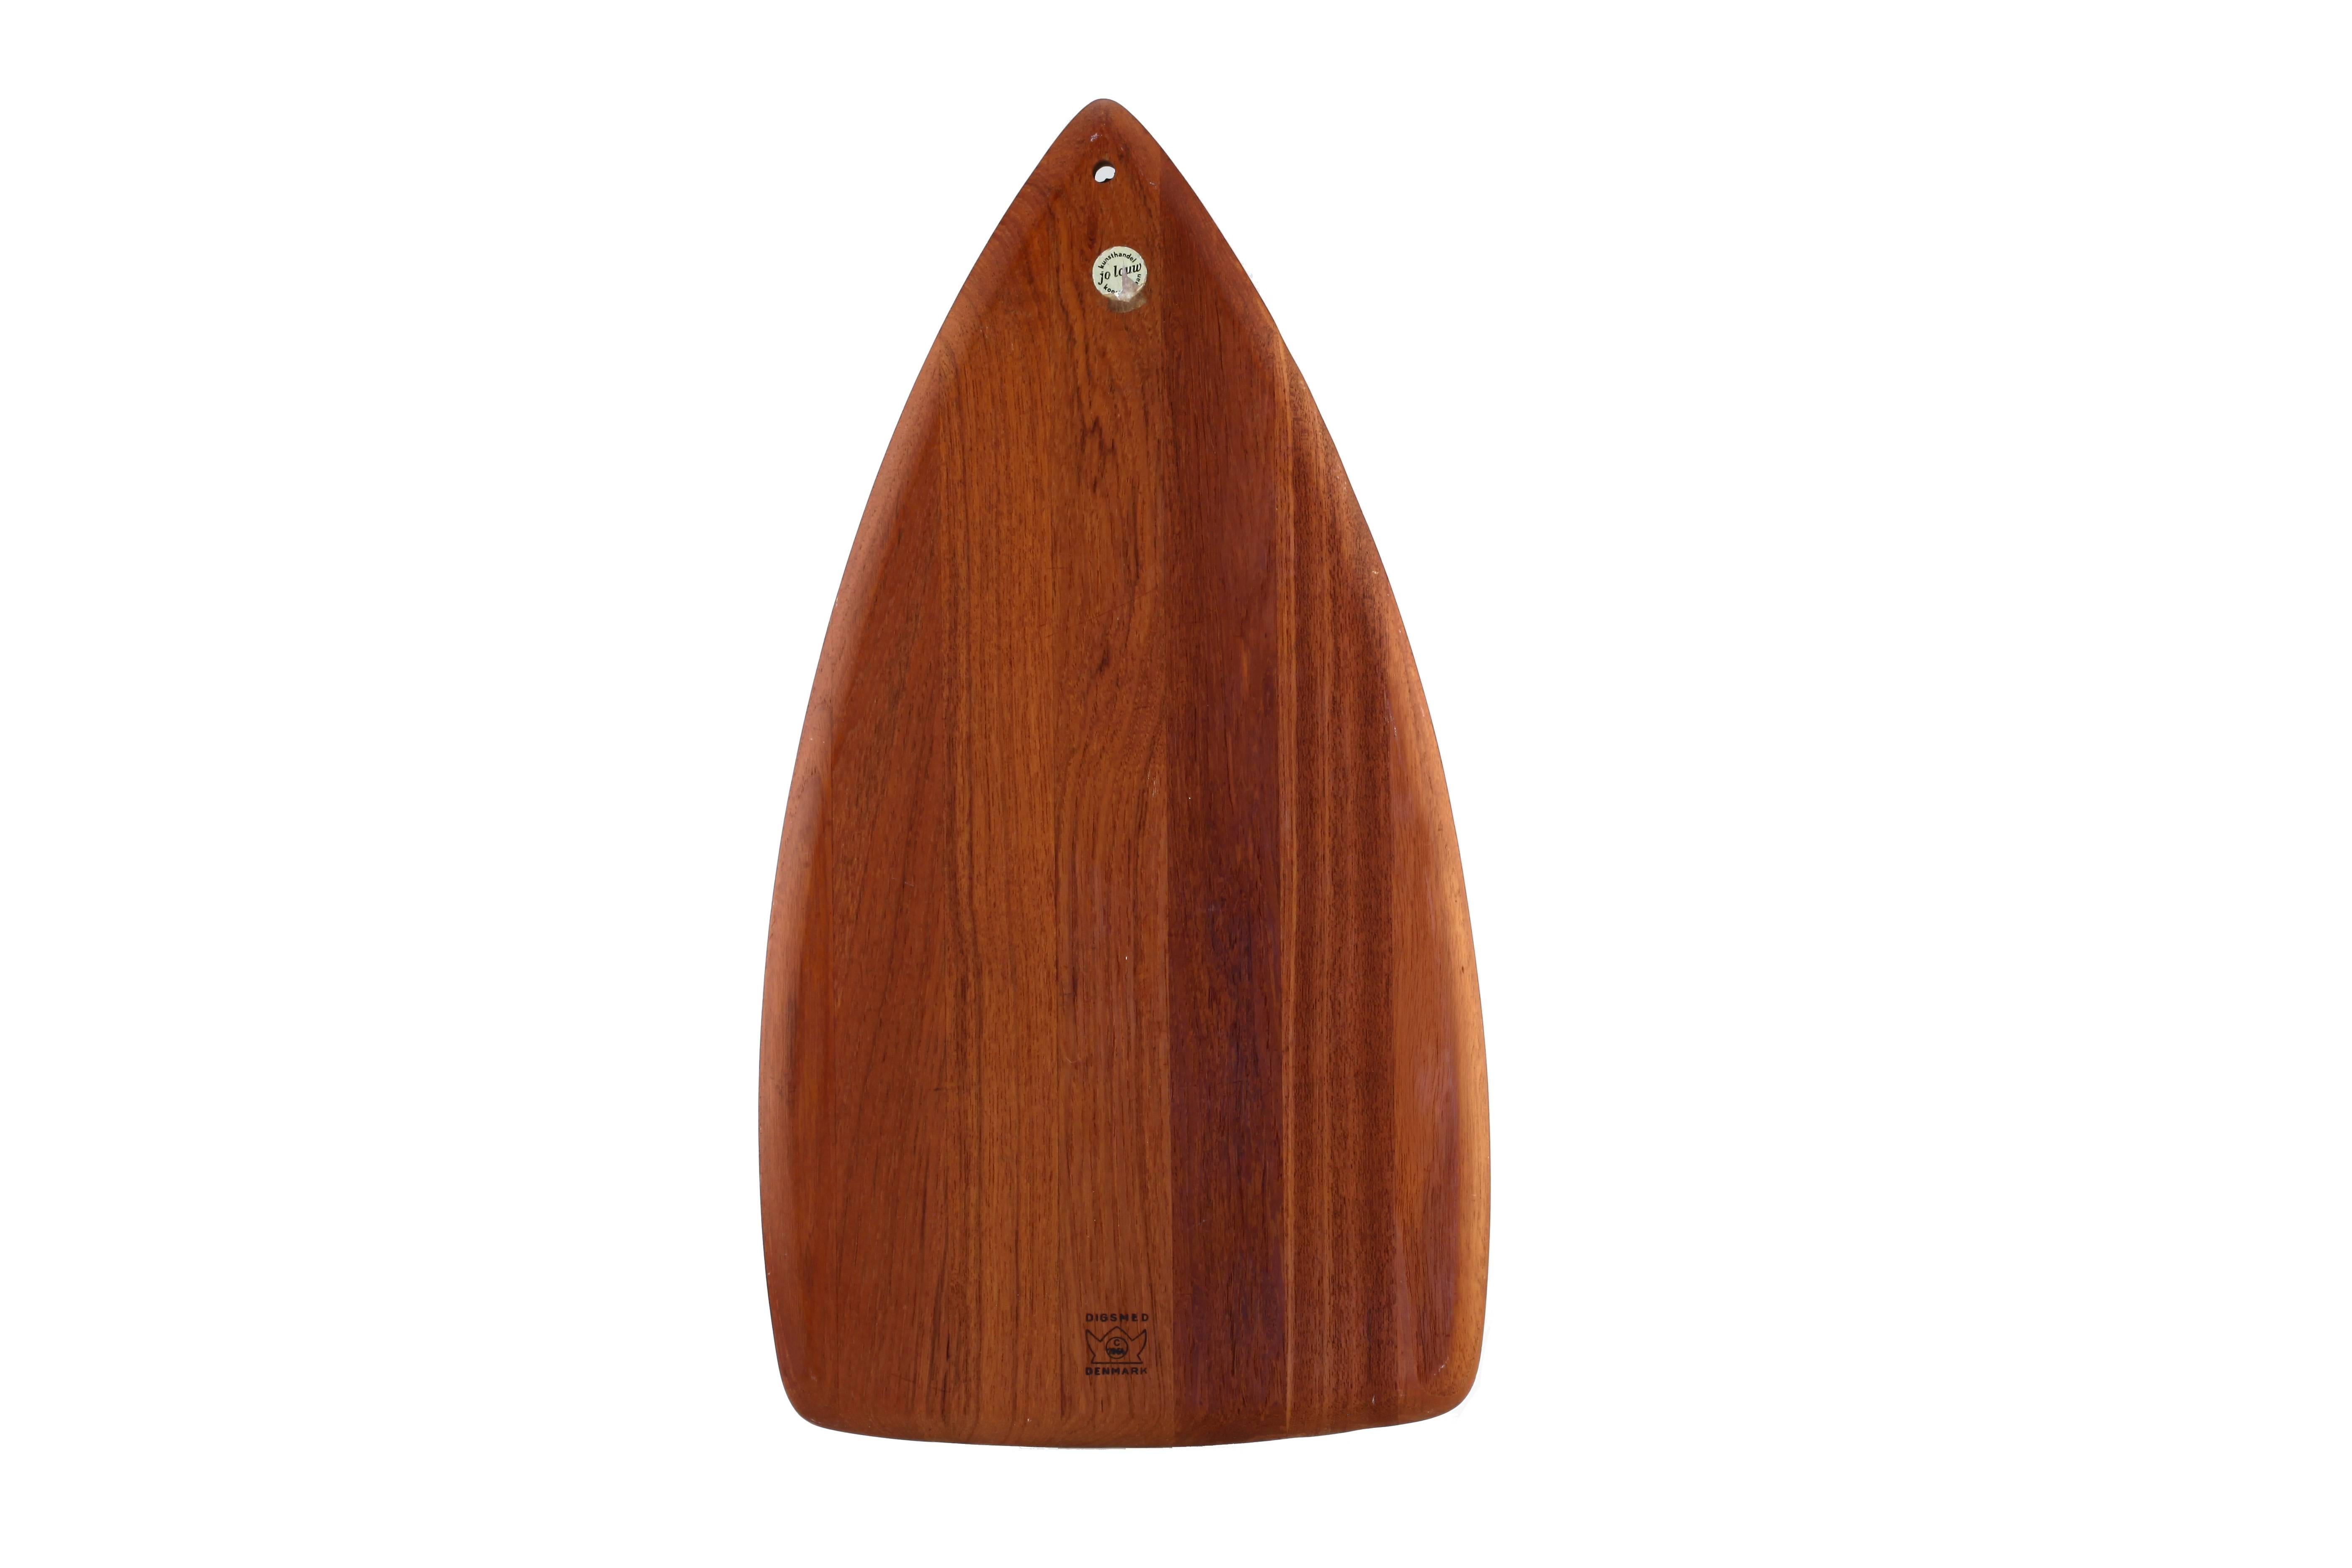 Vintage Mid-Century Digsmed Denmark large modern teak carving board, Danish modern wood cutting board, cheese board with original knife.

Measures: Height: 1 cm / 0.4 inch,
Length: 55 cm / 21.65 inch,
Width: 30 cm / 11.8 inch.

It is in an